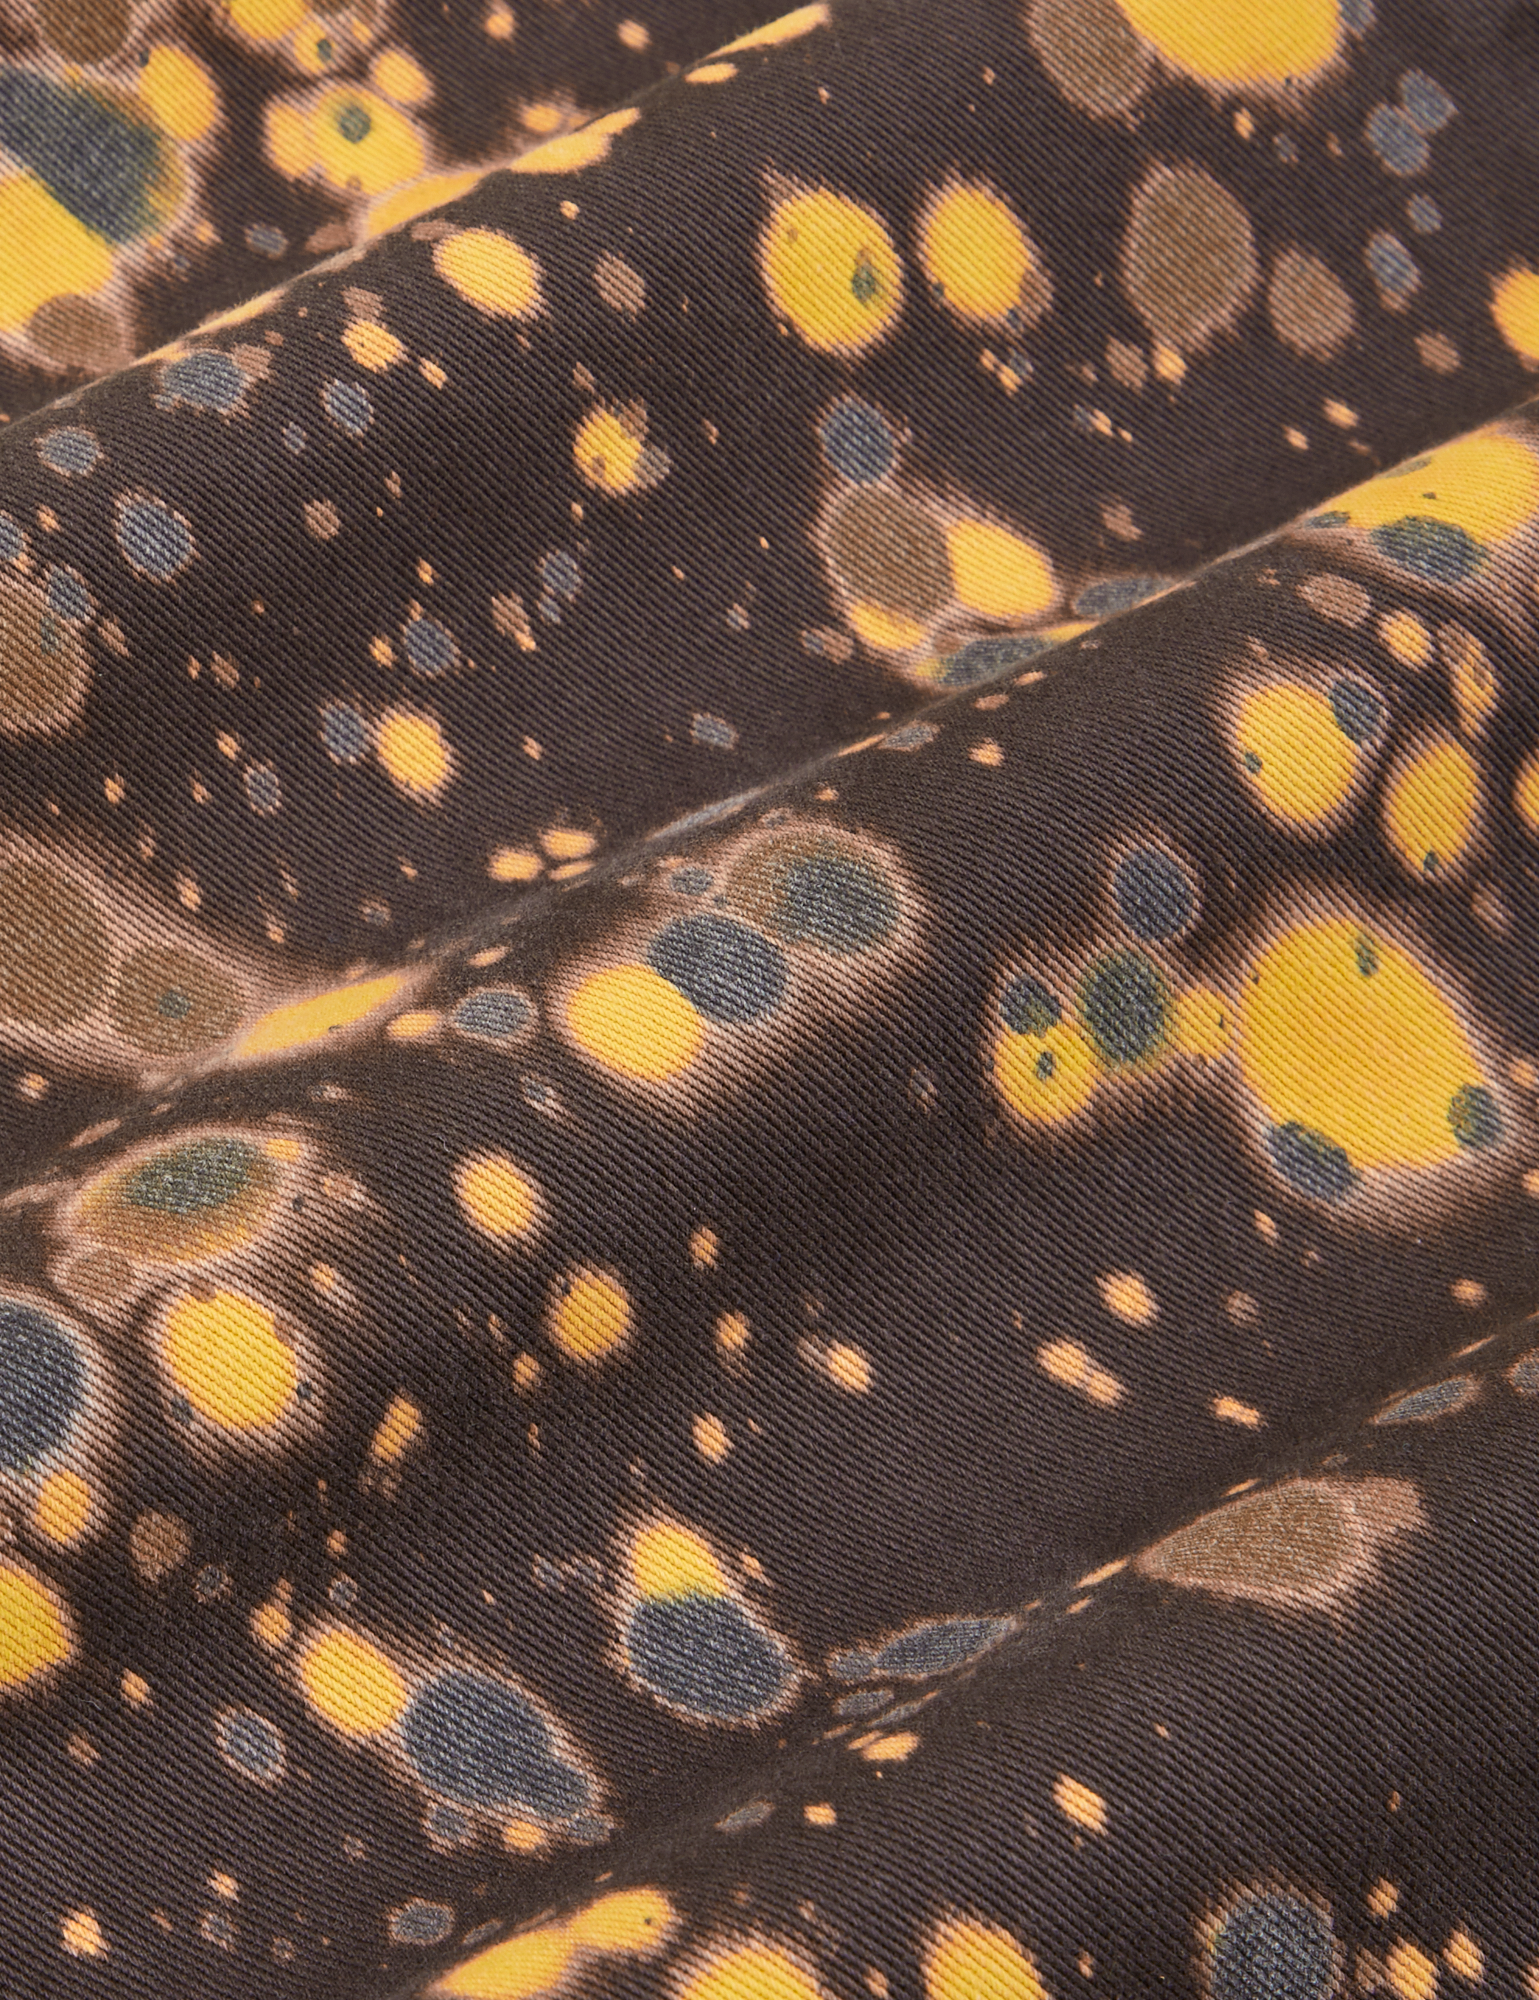 Marble Splatter Work Pants in Espresso Brown fabric detail close up. Splatter paint in yellow, brown and black.